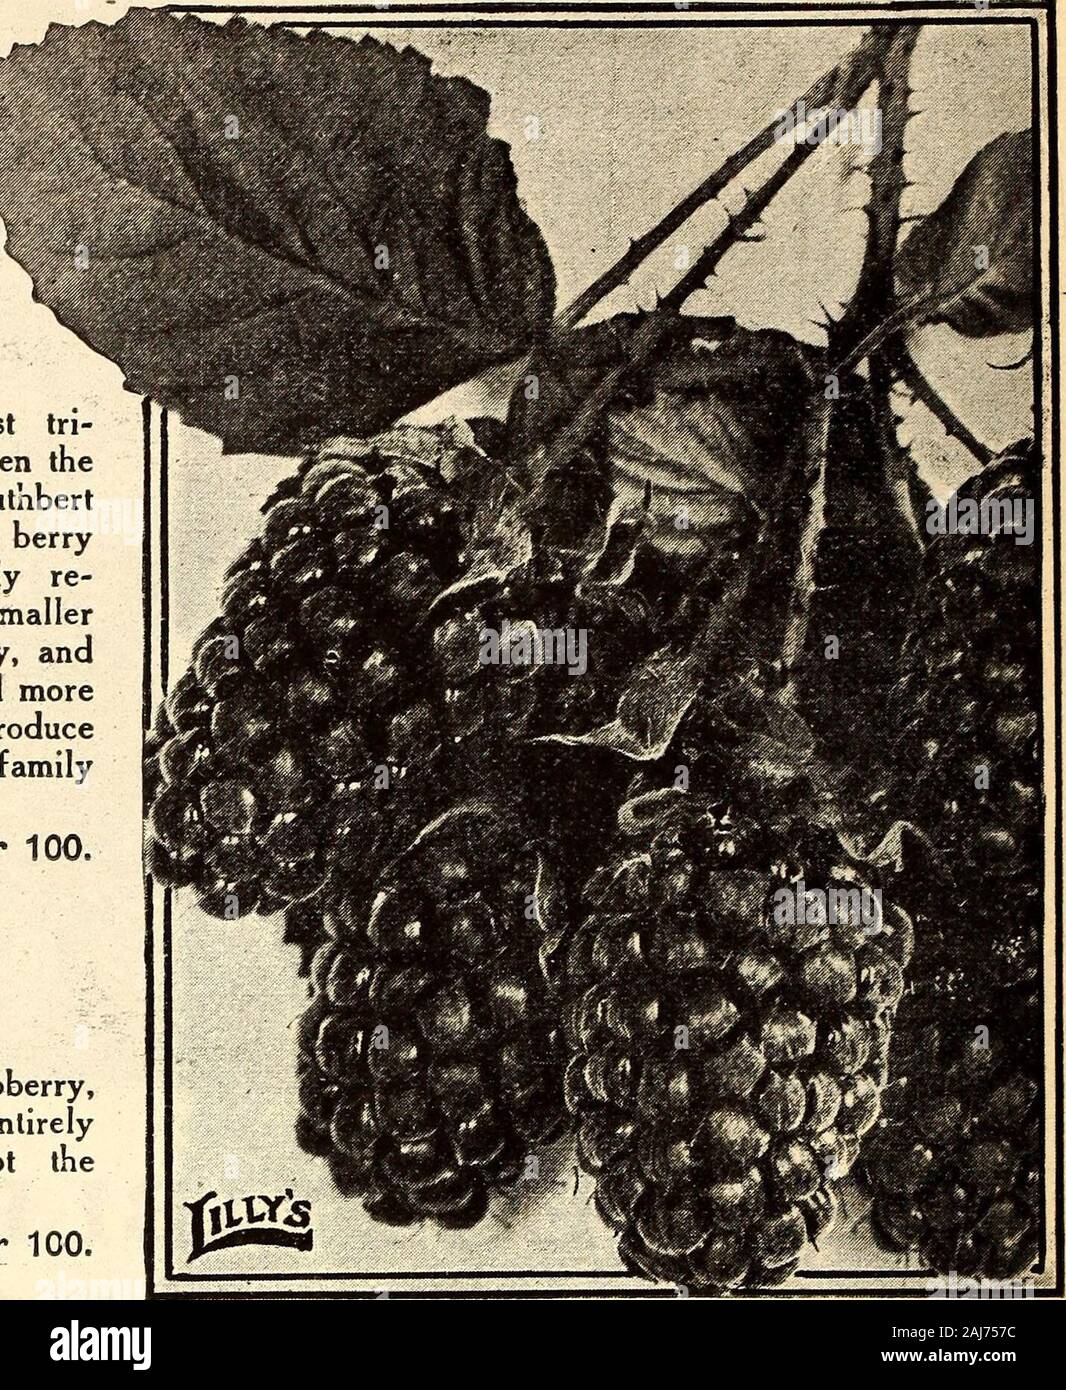 Lilly's complete annual : bee supplies spray materiels poultry supplies fertilizers seeds . lly, andthe canes are stronger, more vigorous, and moreproductive. A half-dozen plants will produceall of this delicious fruit that an ordinary familycan use. 20c each; $2.C0 dozen; $12.50 per 100. Loganberry A cross between the blackberry and raspberry,superior to either in size and flavor, and entirelydifferent from any other berry except thePhenomenal. 15c each; $1.50 dozen; $10.00 per 100. blackberriesHimalaya Giant New Mammoth A remarkable berry, producing immense, crops ofexceedingly large, sweet, Stock Photo